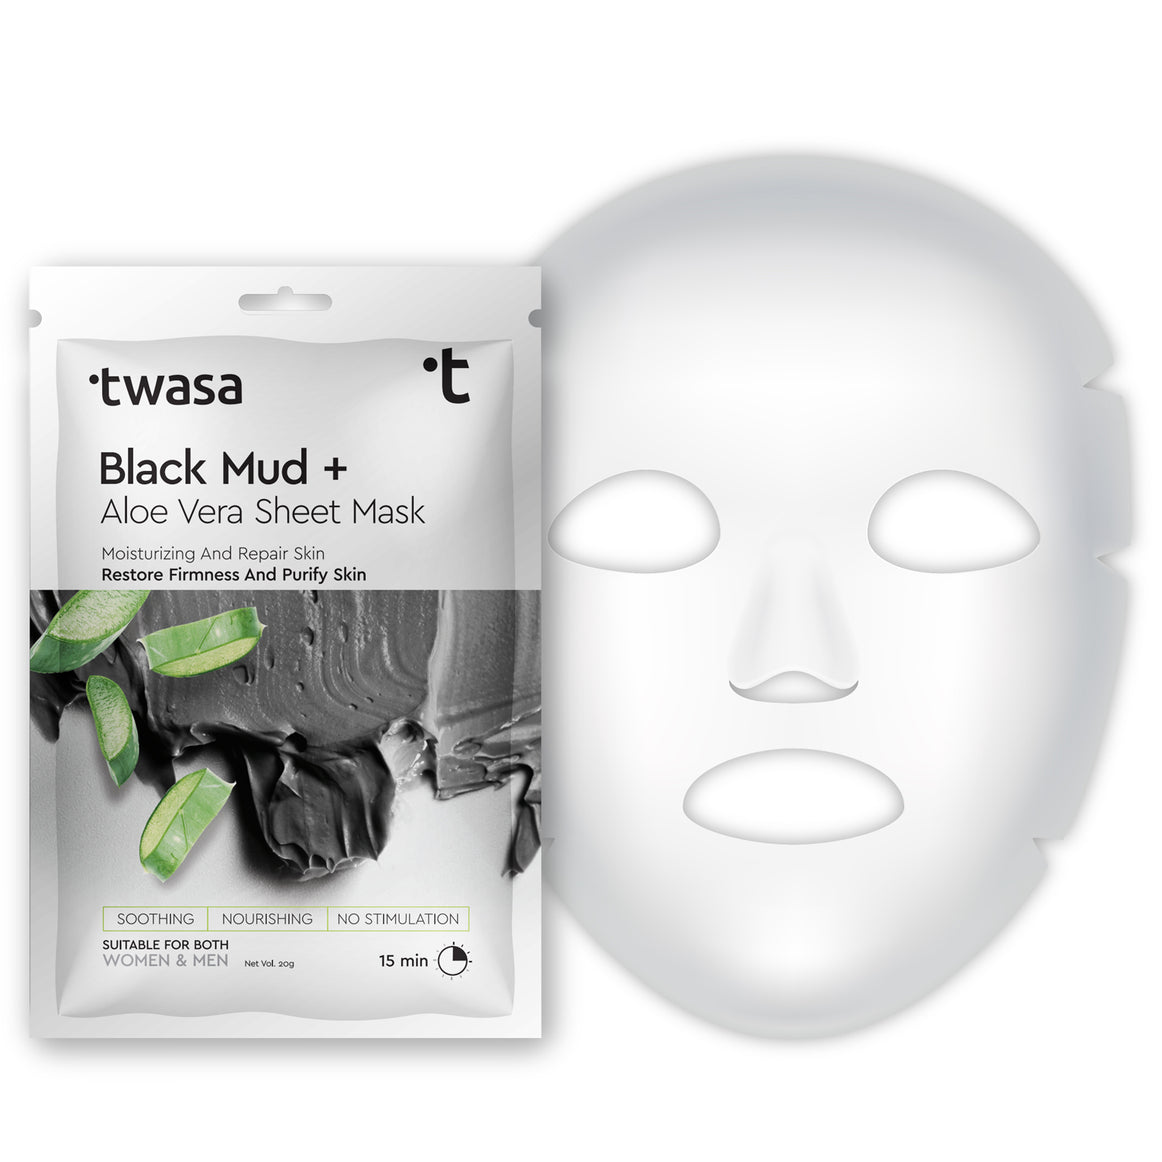 Buy Black Mud Face Sheet Mask Online at Low Price in India